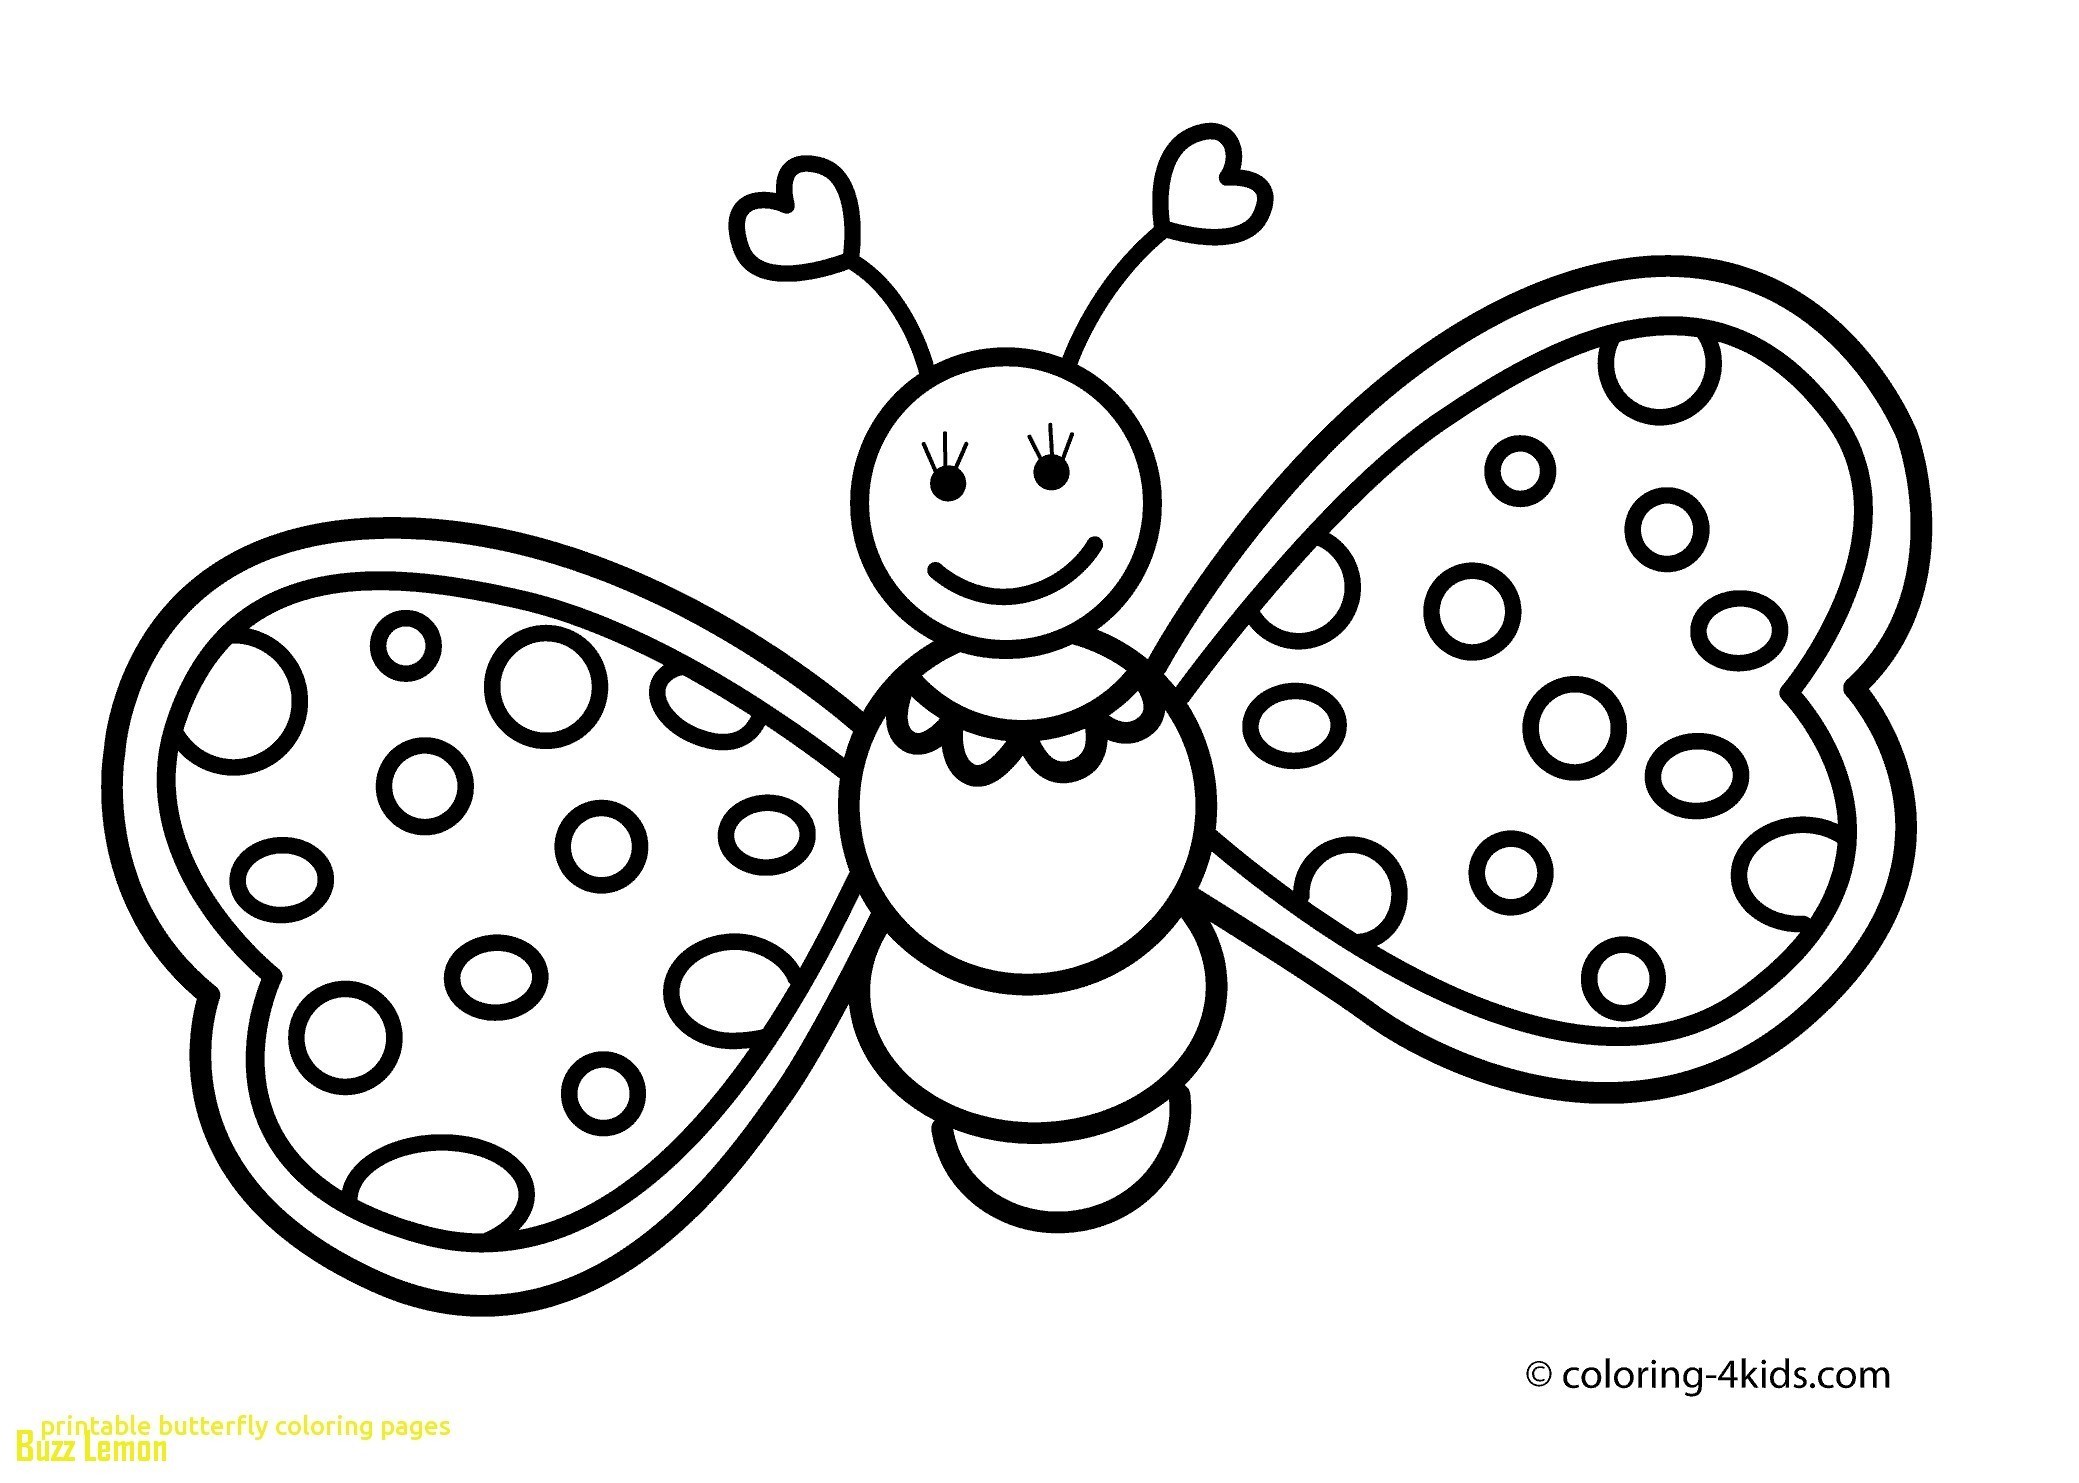 A butterfly Coloring Page Wallpaper